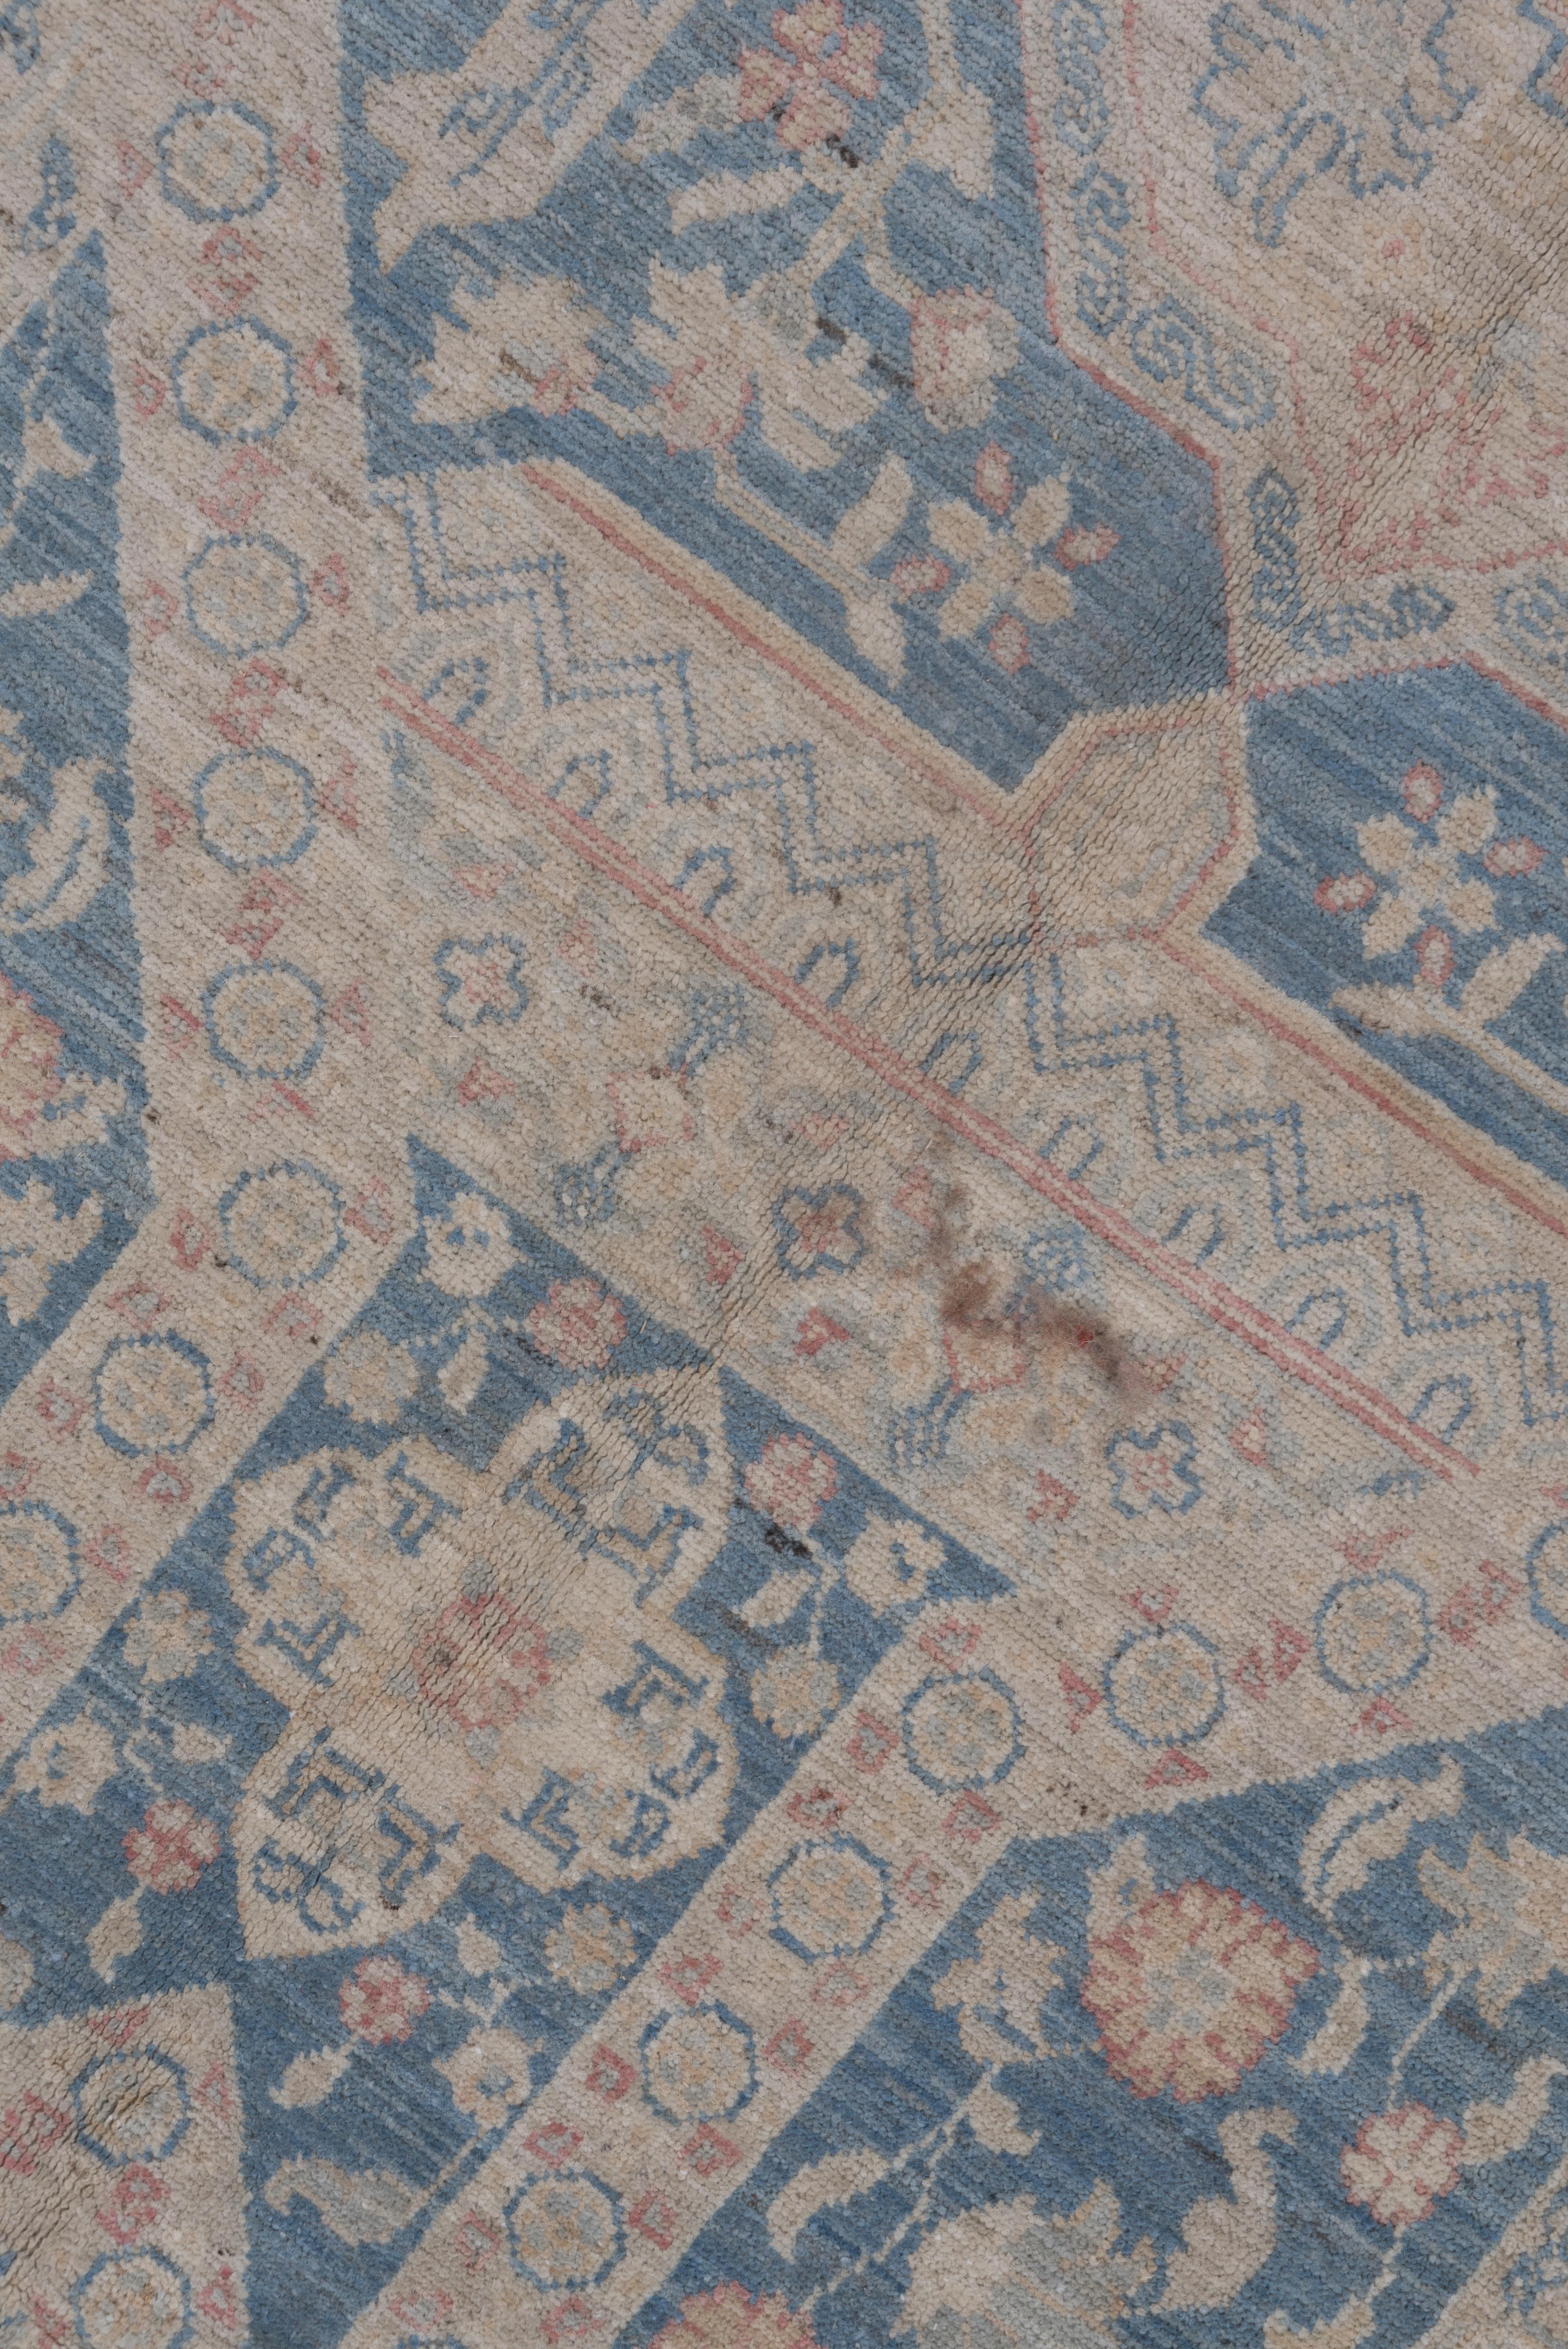 Blue Hand Knotted Tribal Afghan Carpet In Excellent Condition For Sale In New York, NY